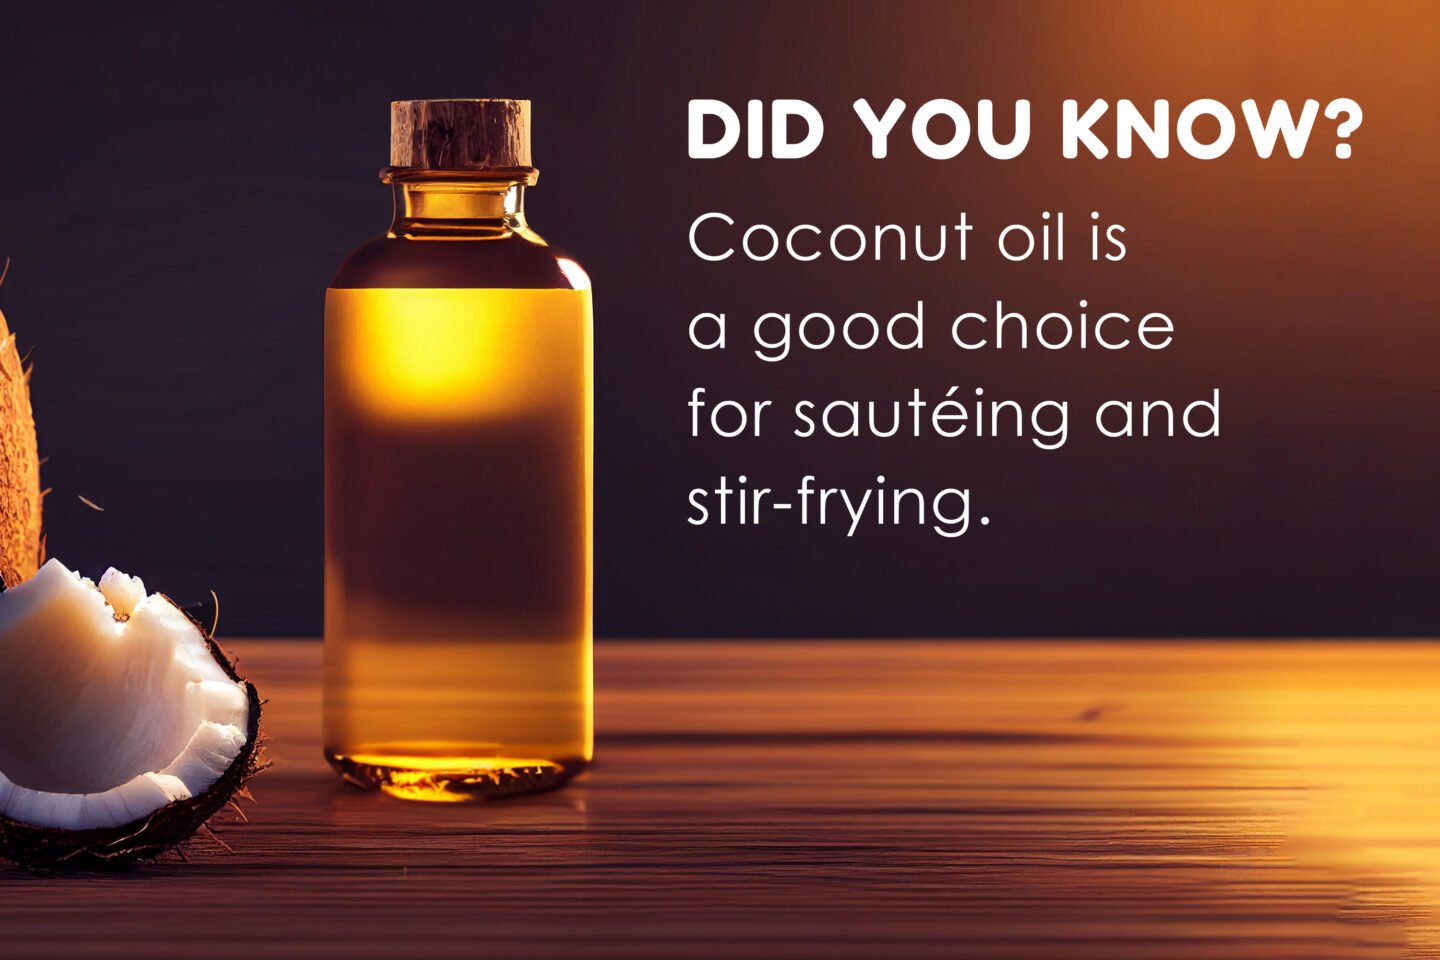 coconut oil did you know